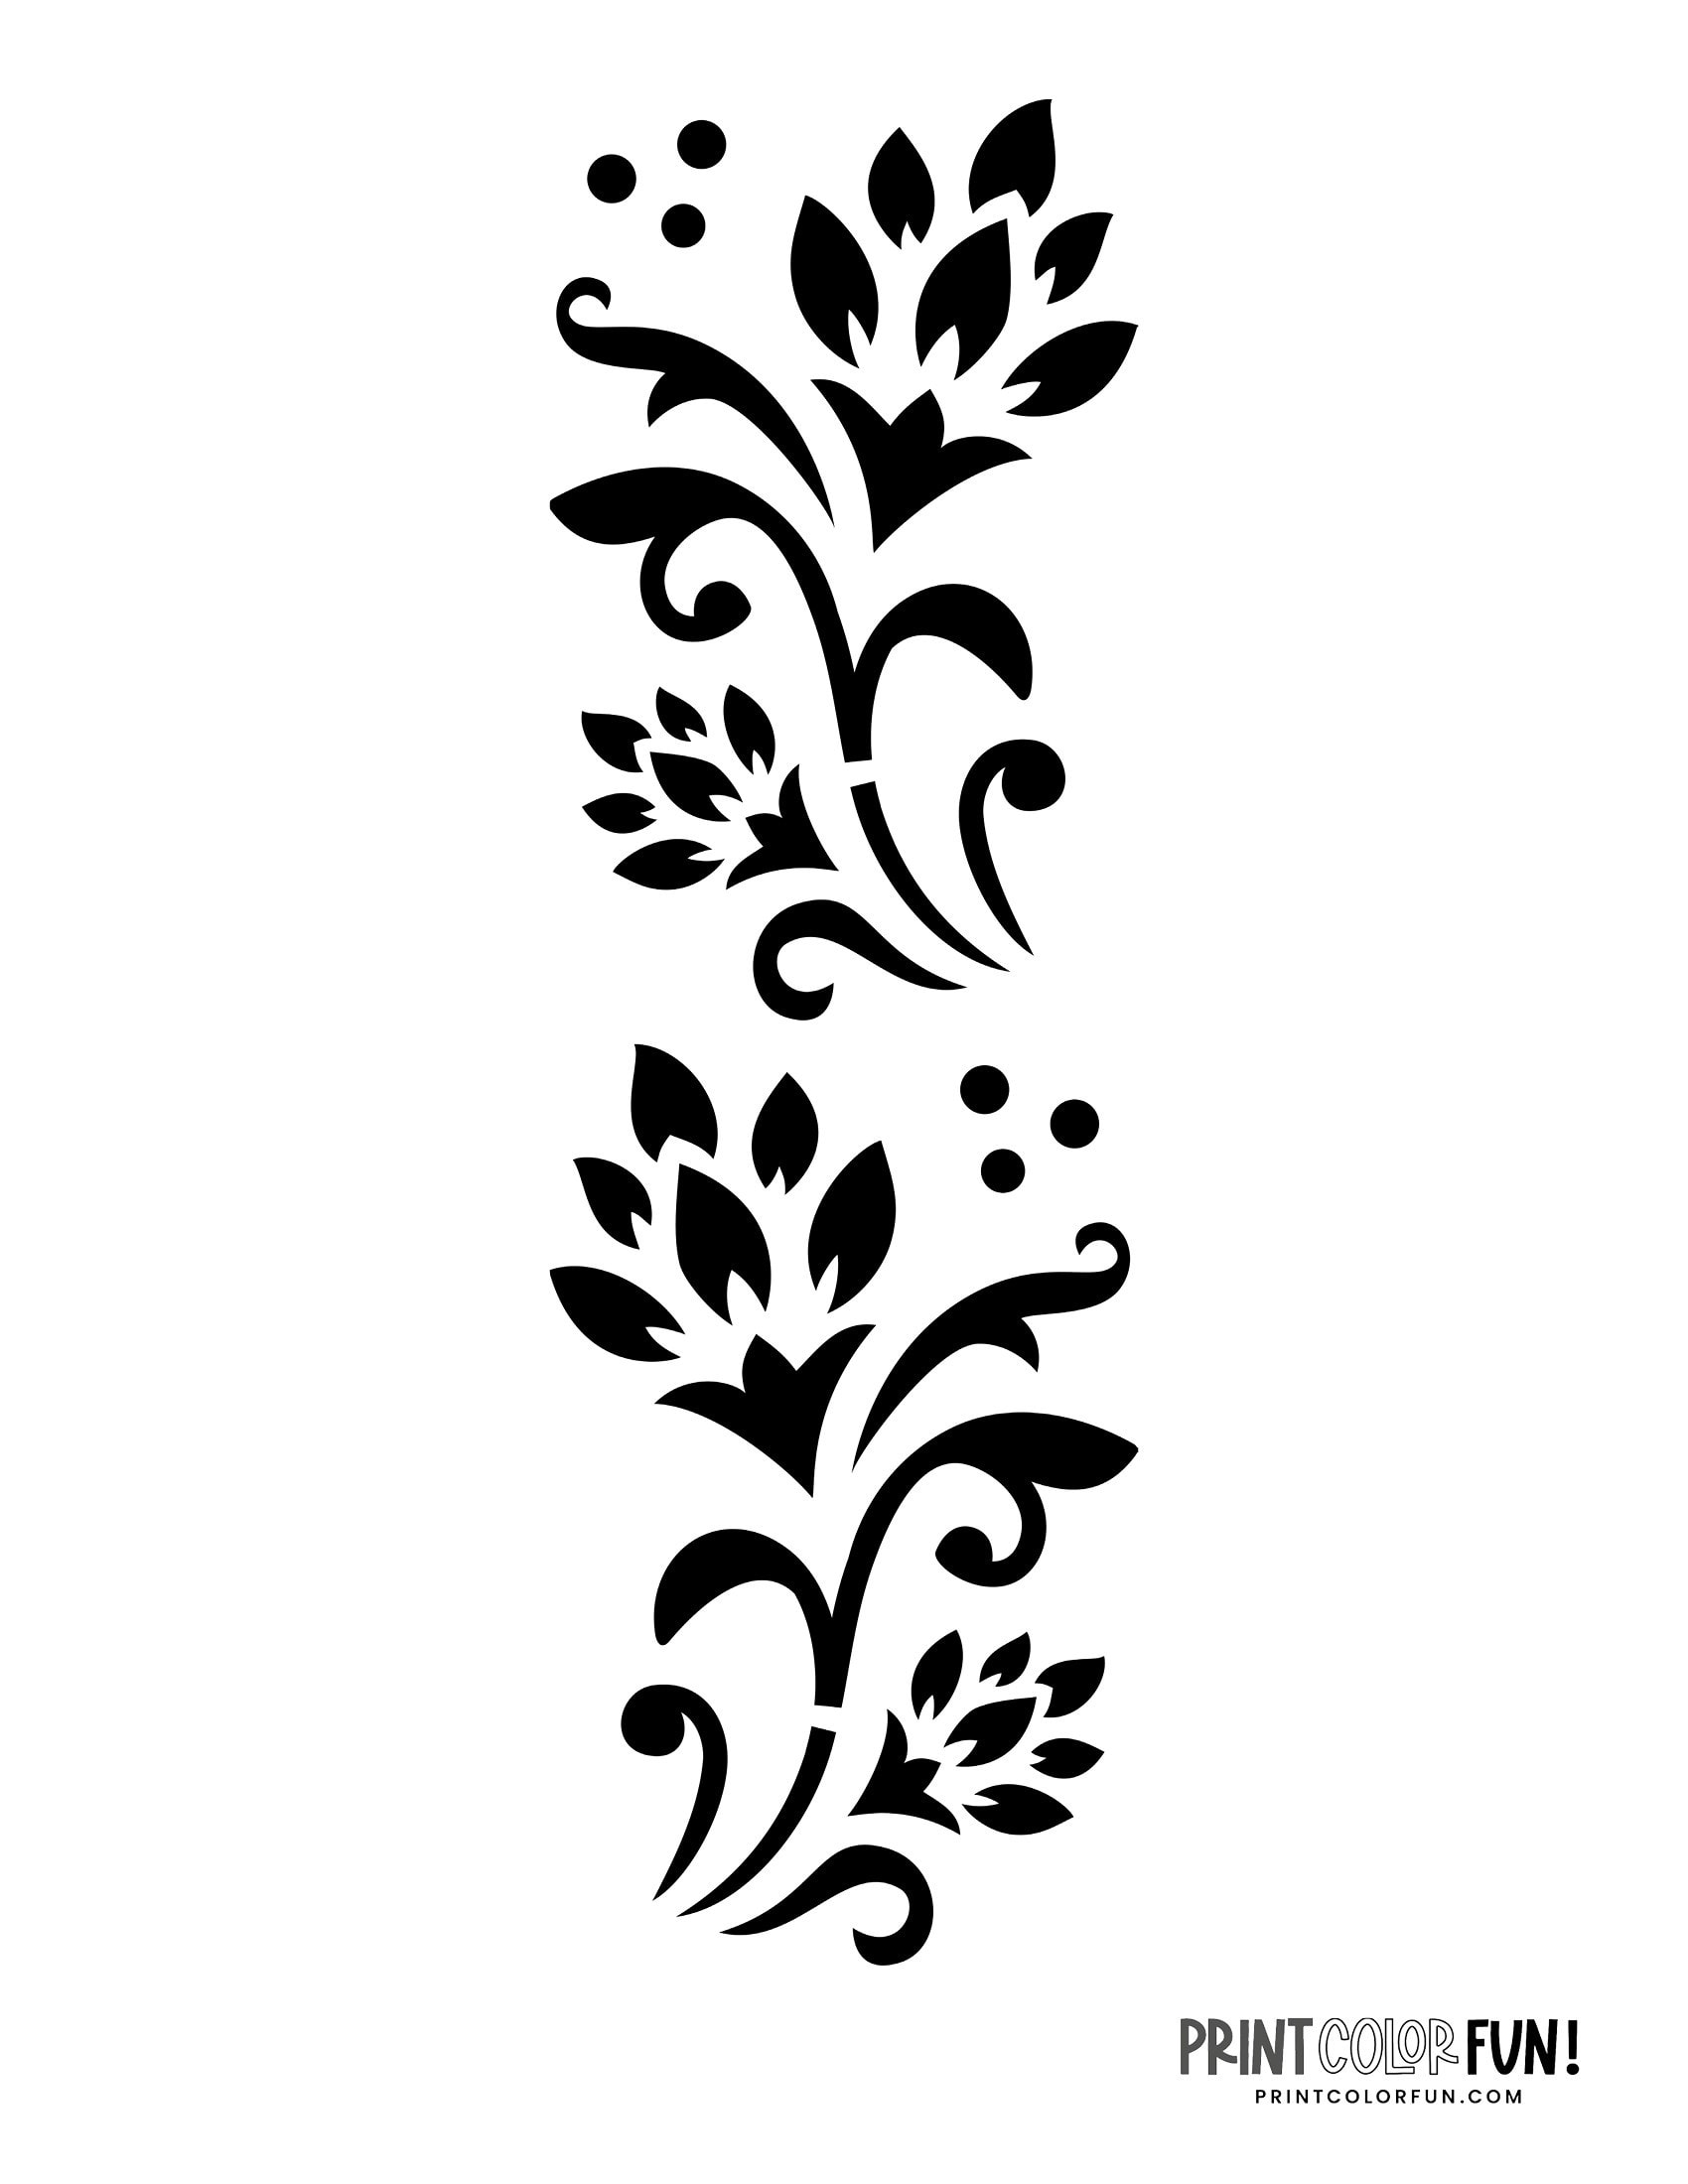 10 free flower stencil designs for printing & craft projects Print